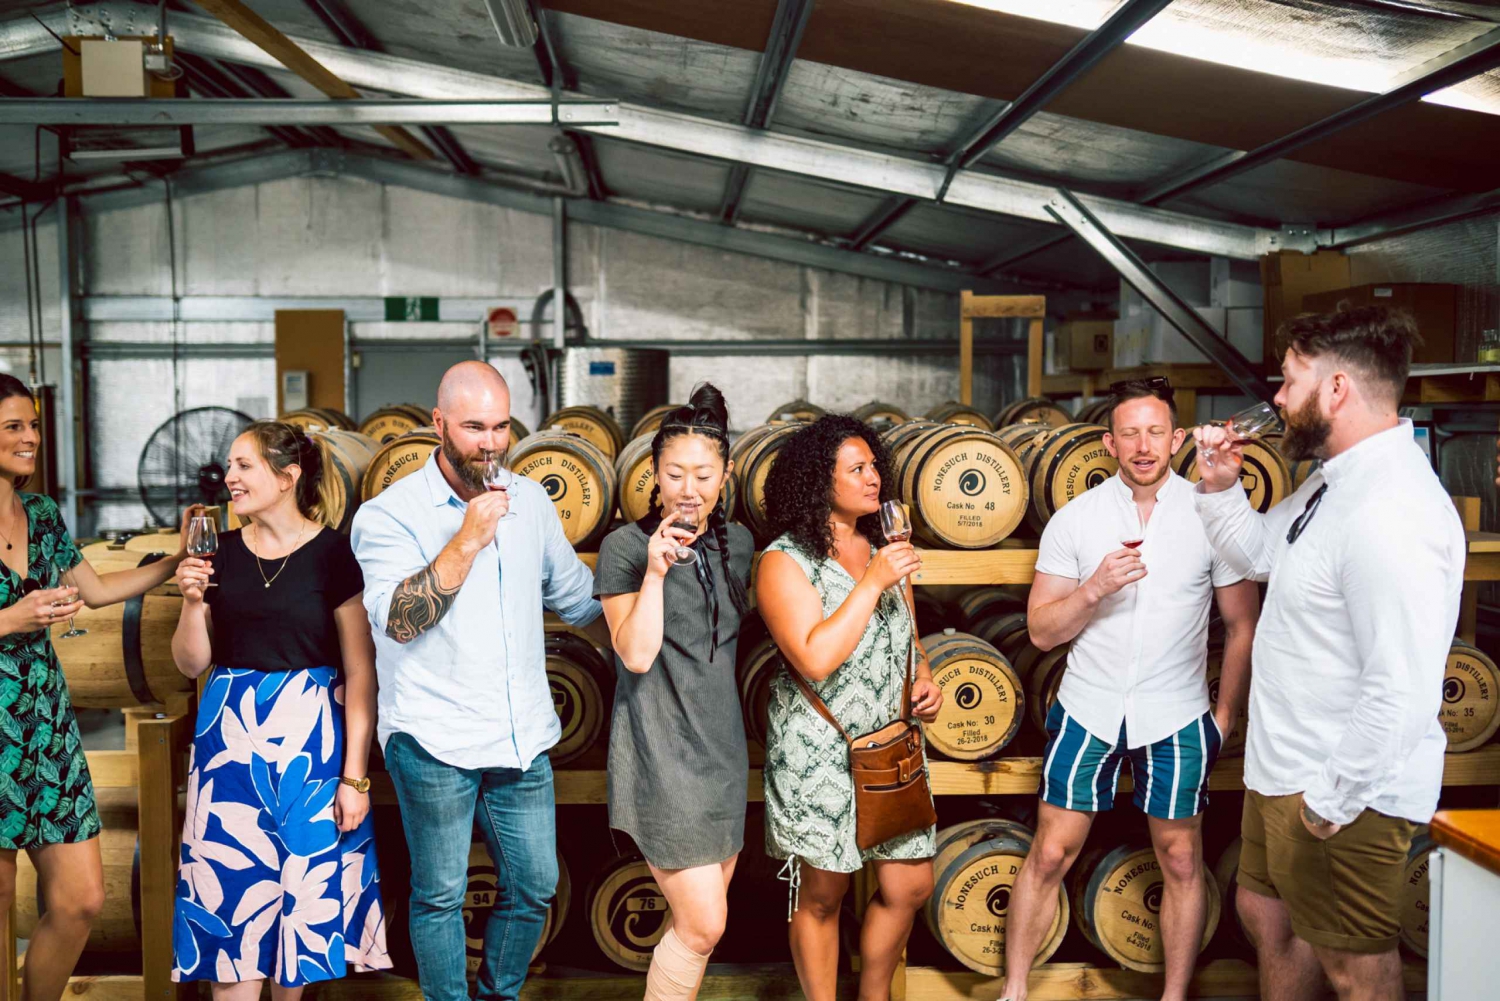 Tasmania: Full-Day Gin & Wine Tasting Tour with Lunch